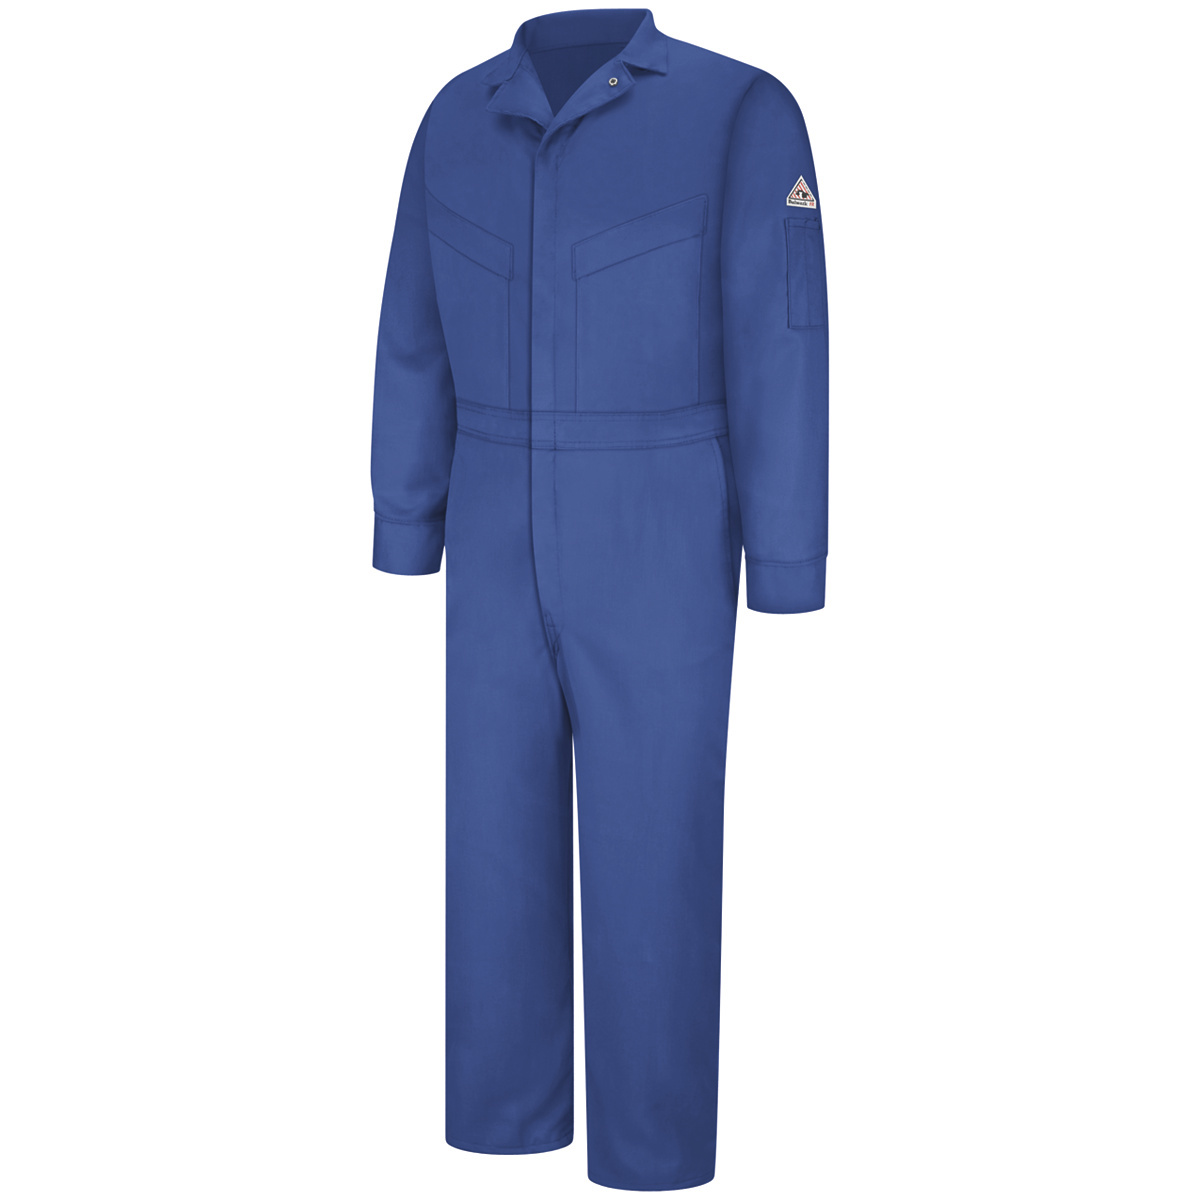 Bulwark® 44 Regular Royal Blue EXCEL FR® ComforTouch® Sateen/Cotton/Nylon Water Repellent Flame Resistant Coveralls With Zipper